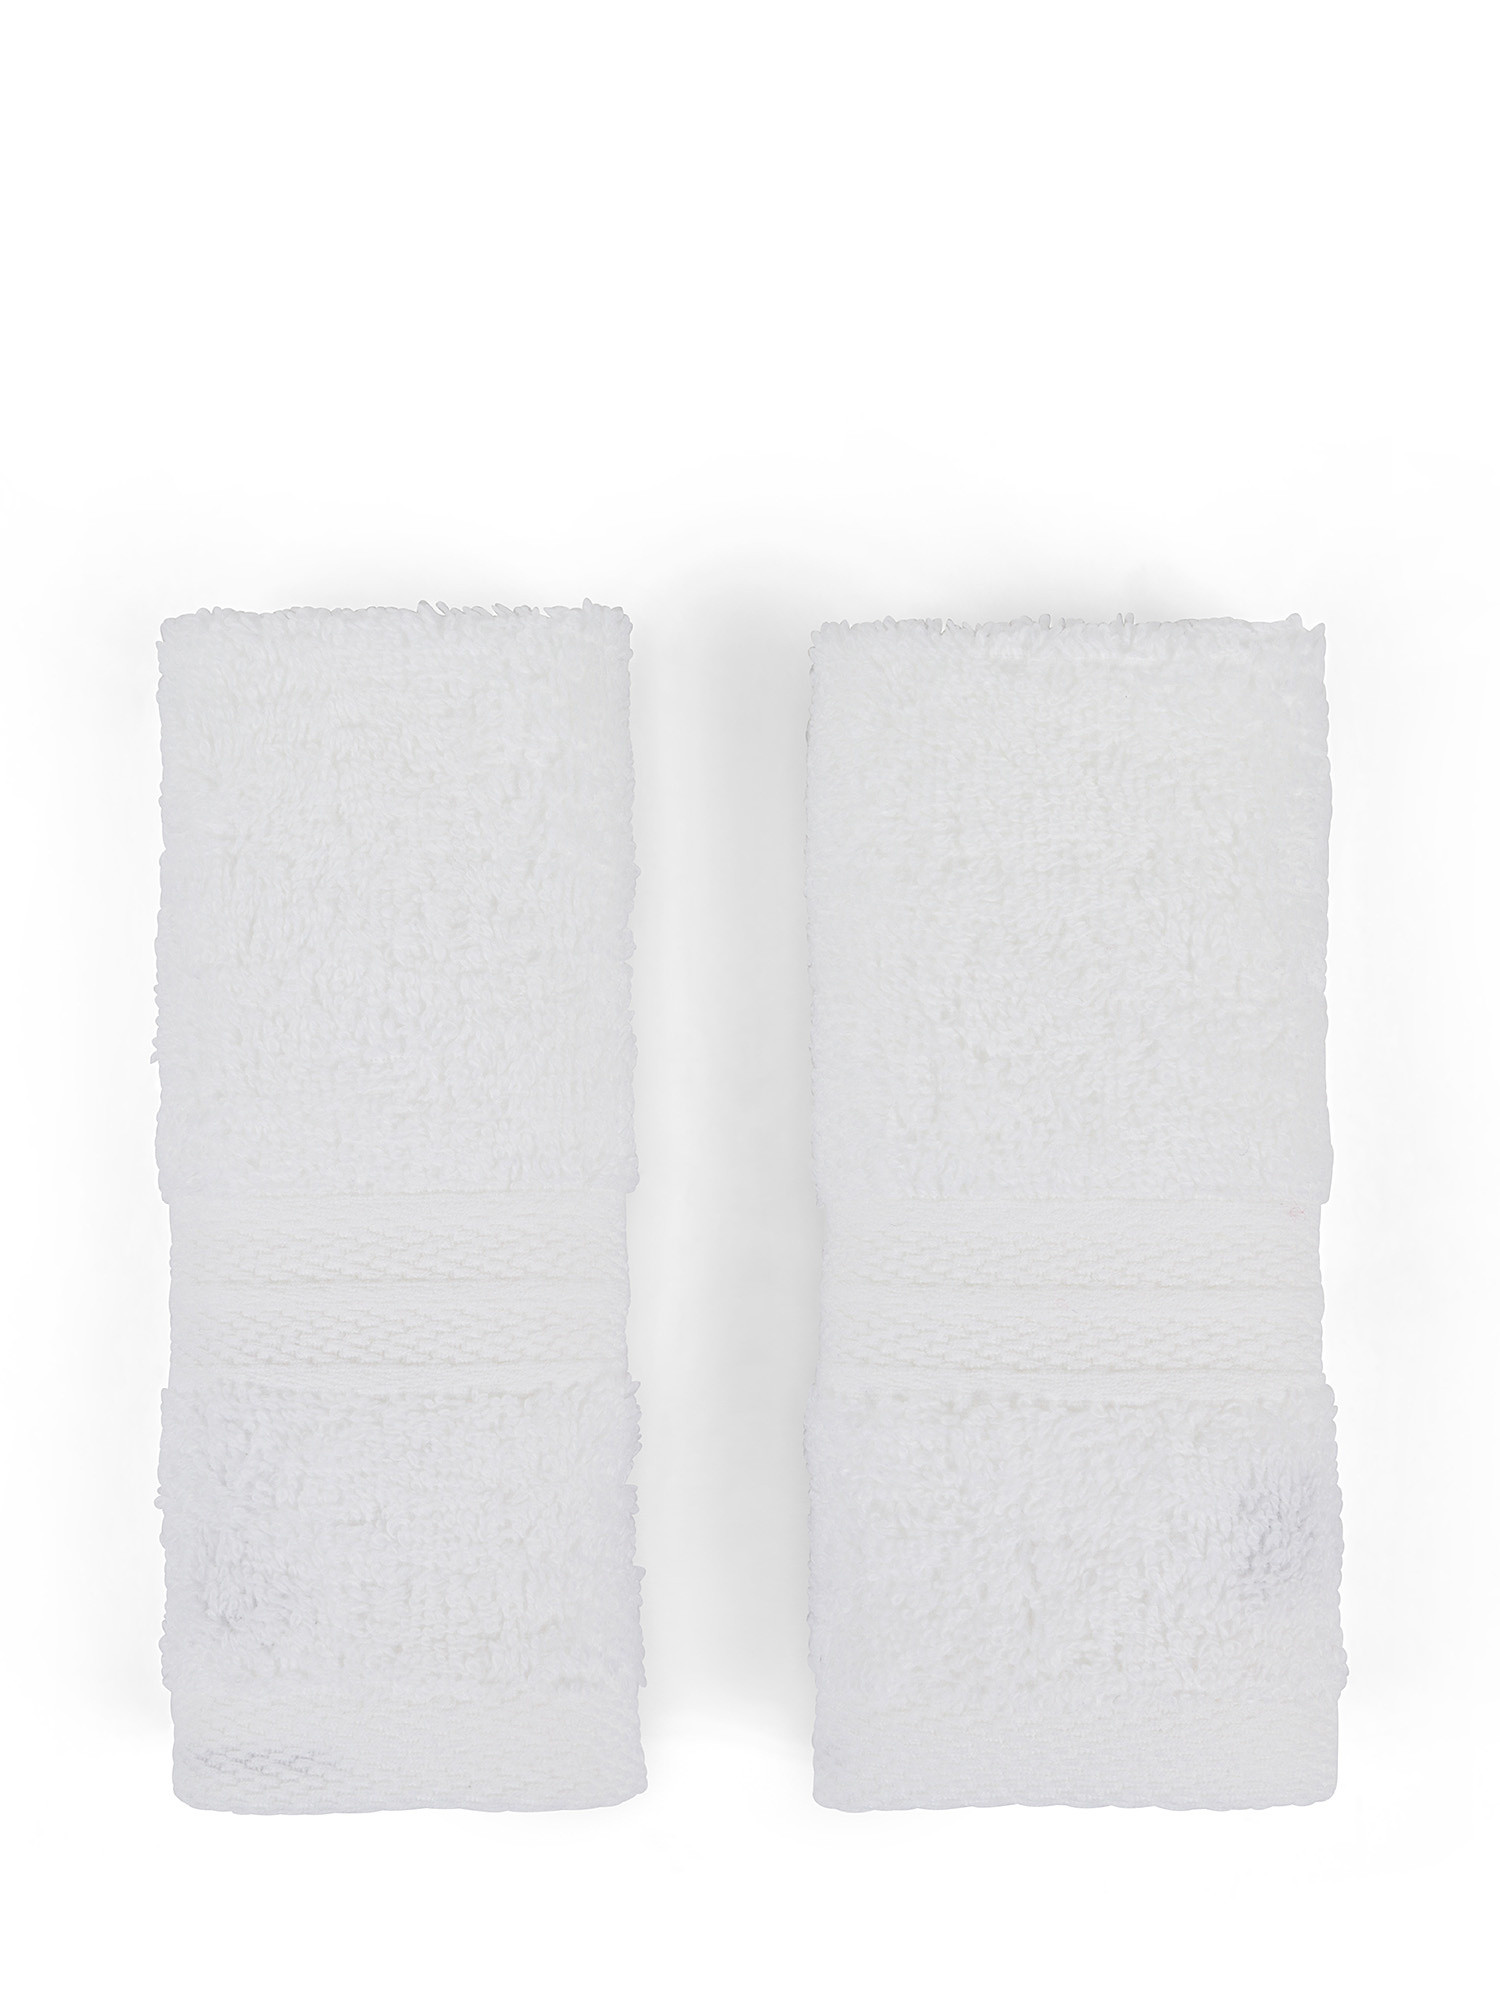 Set of 2 Zefiro solid color 100% cotton washcloths, White, large image number 0